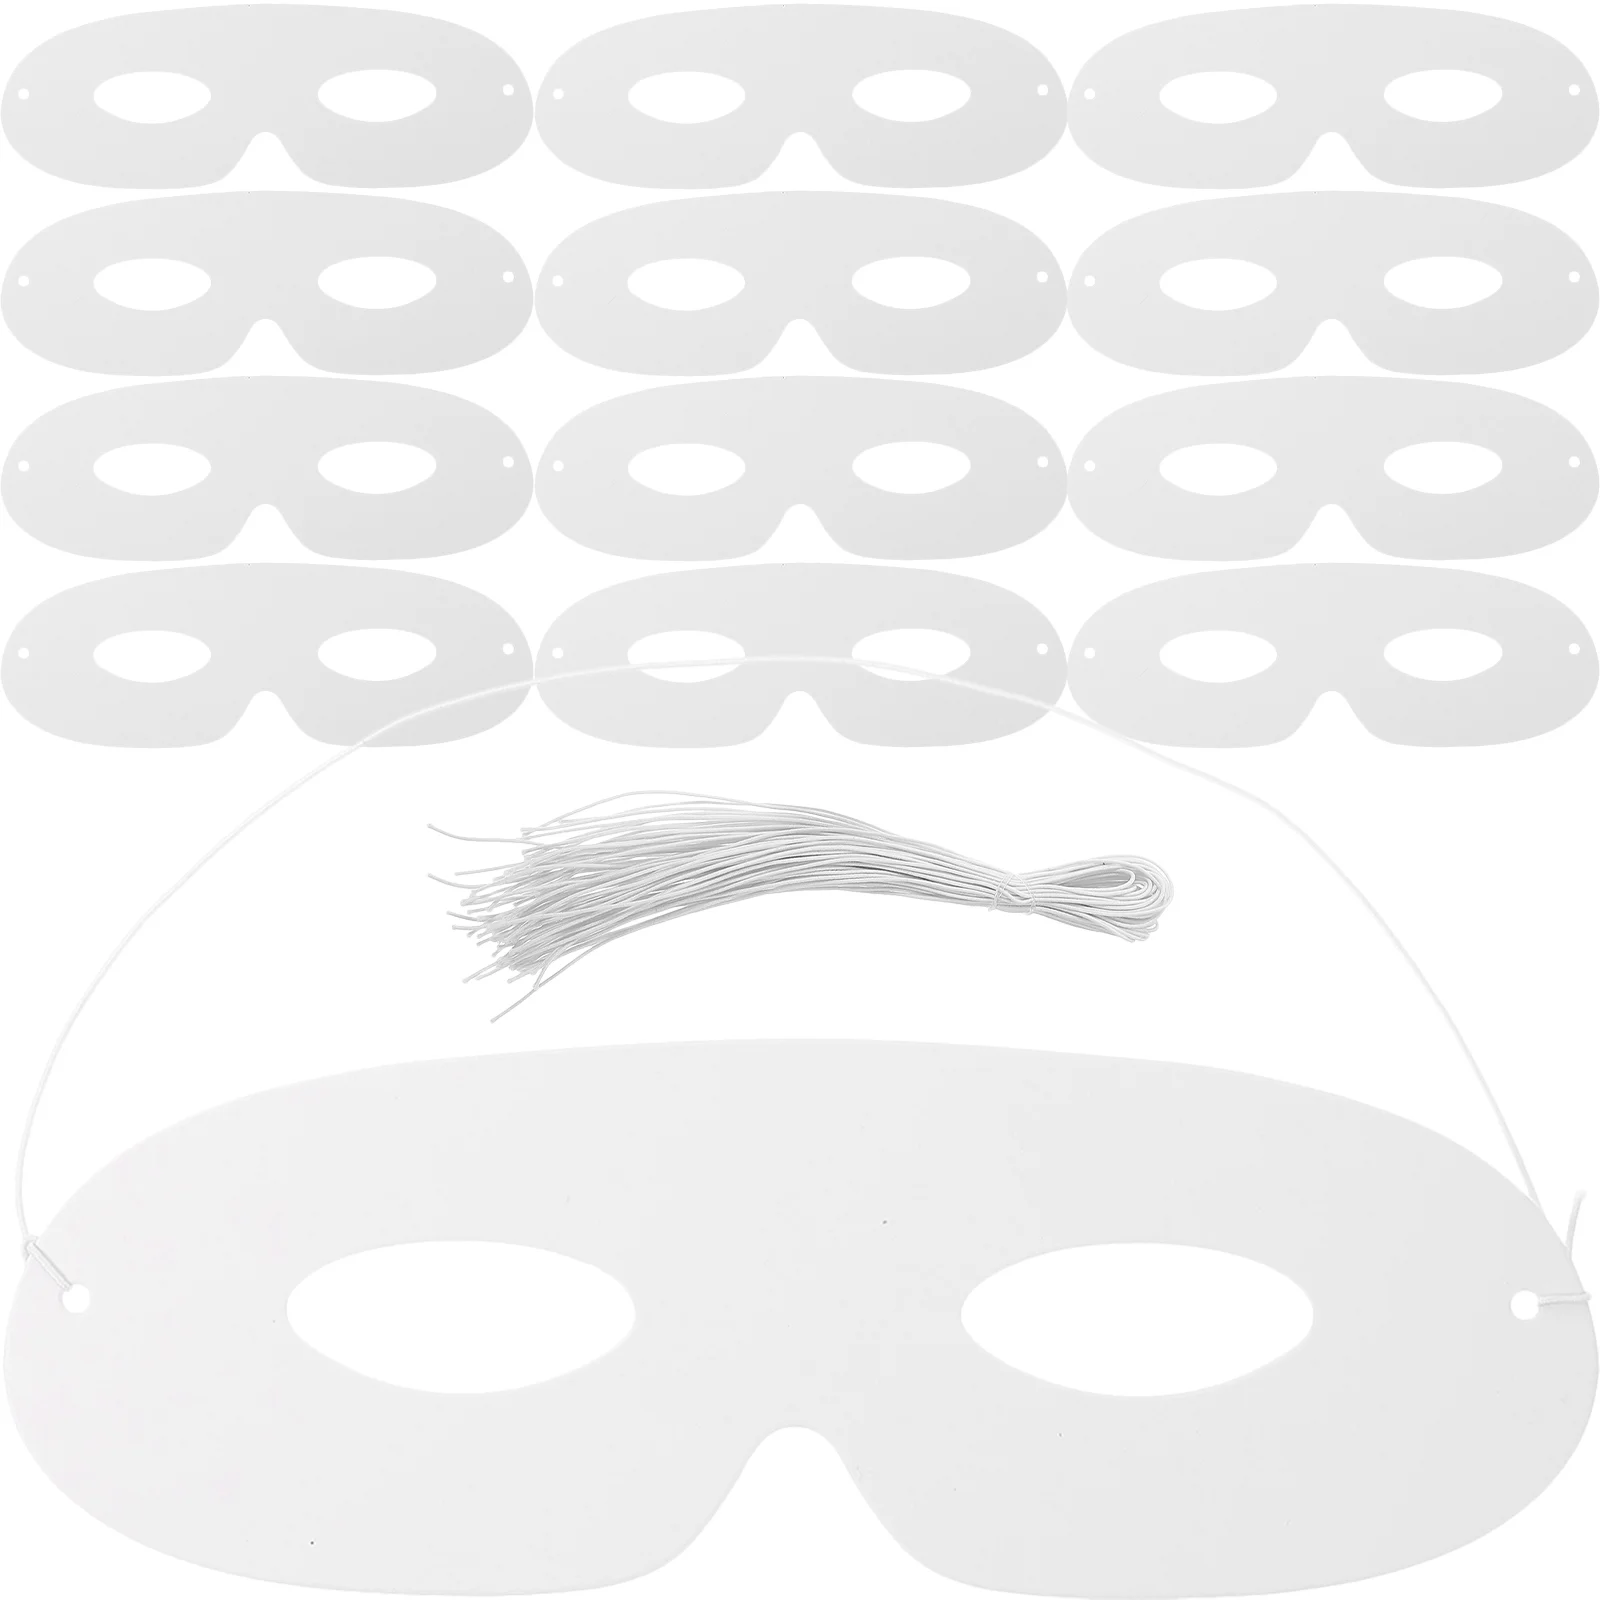 

40 Pcs Eye Patches Blank Masks To Decorate DIY White Paper Manual Hand Painted Half Cosplay Masquerade Costume Accessory Child